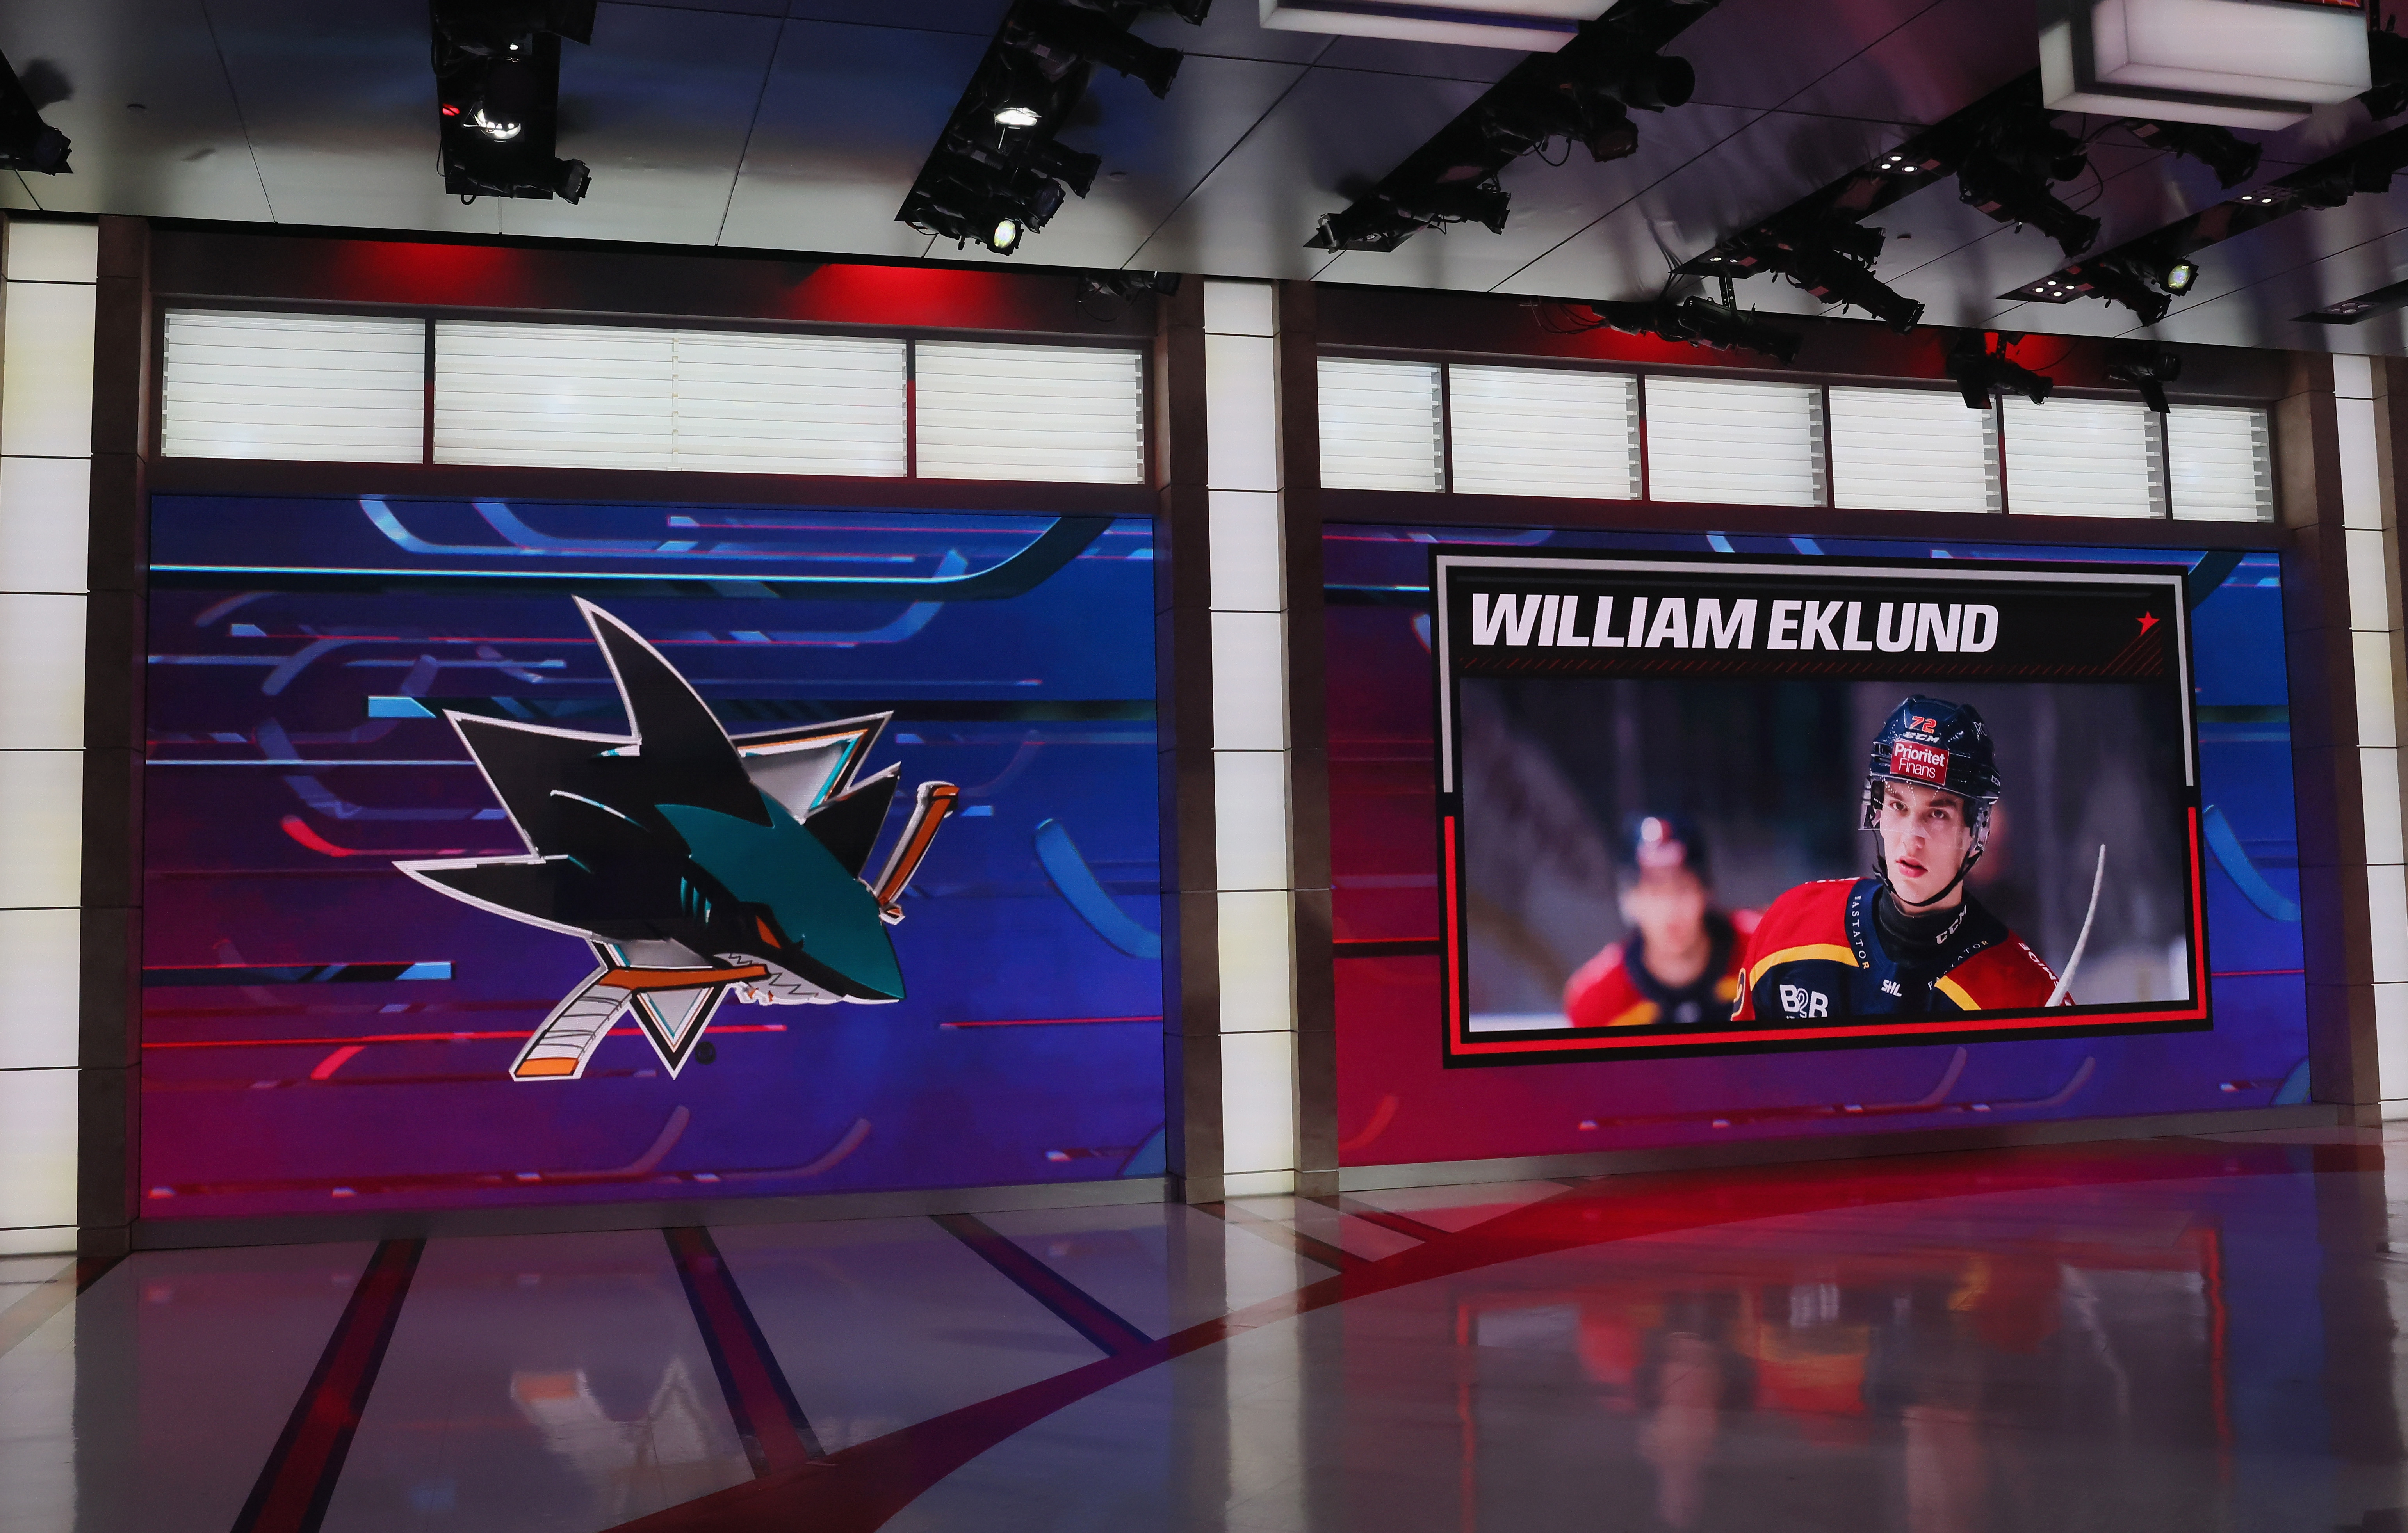 With the seventh pick in the 2021 NHL Entry Draft, the San Jose Sharks select William Eklund during the first round of the 2021 NHL Entry Draft at the NHL Network studios on July 23, 2021 in Secaucus, New Jersey.